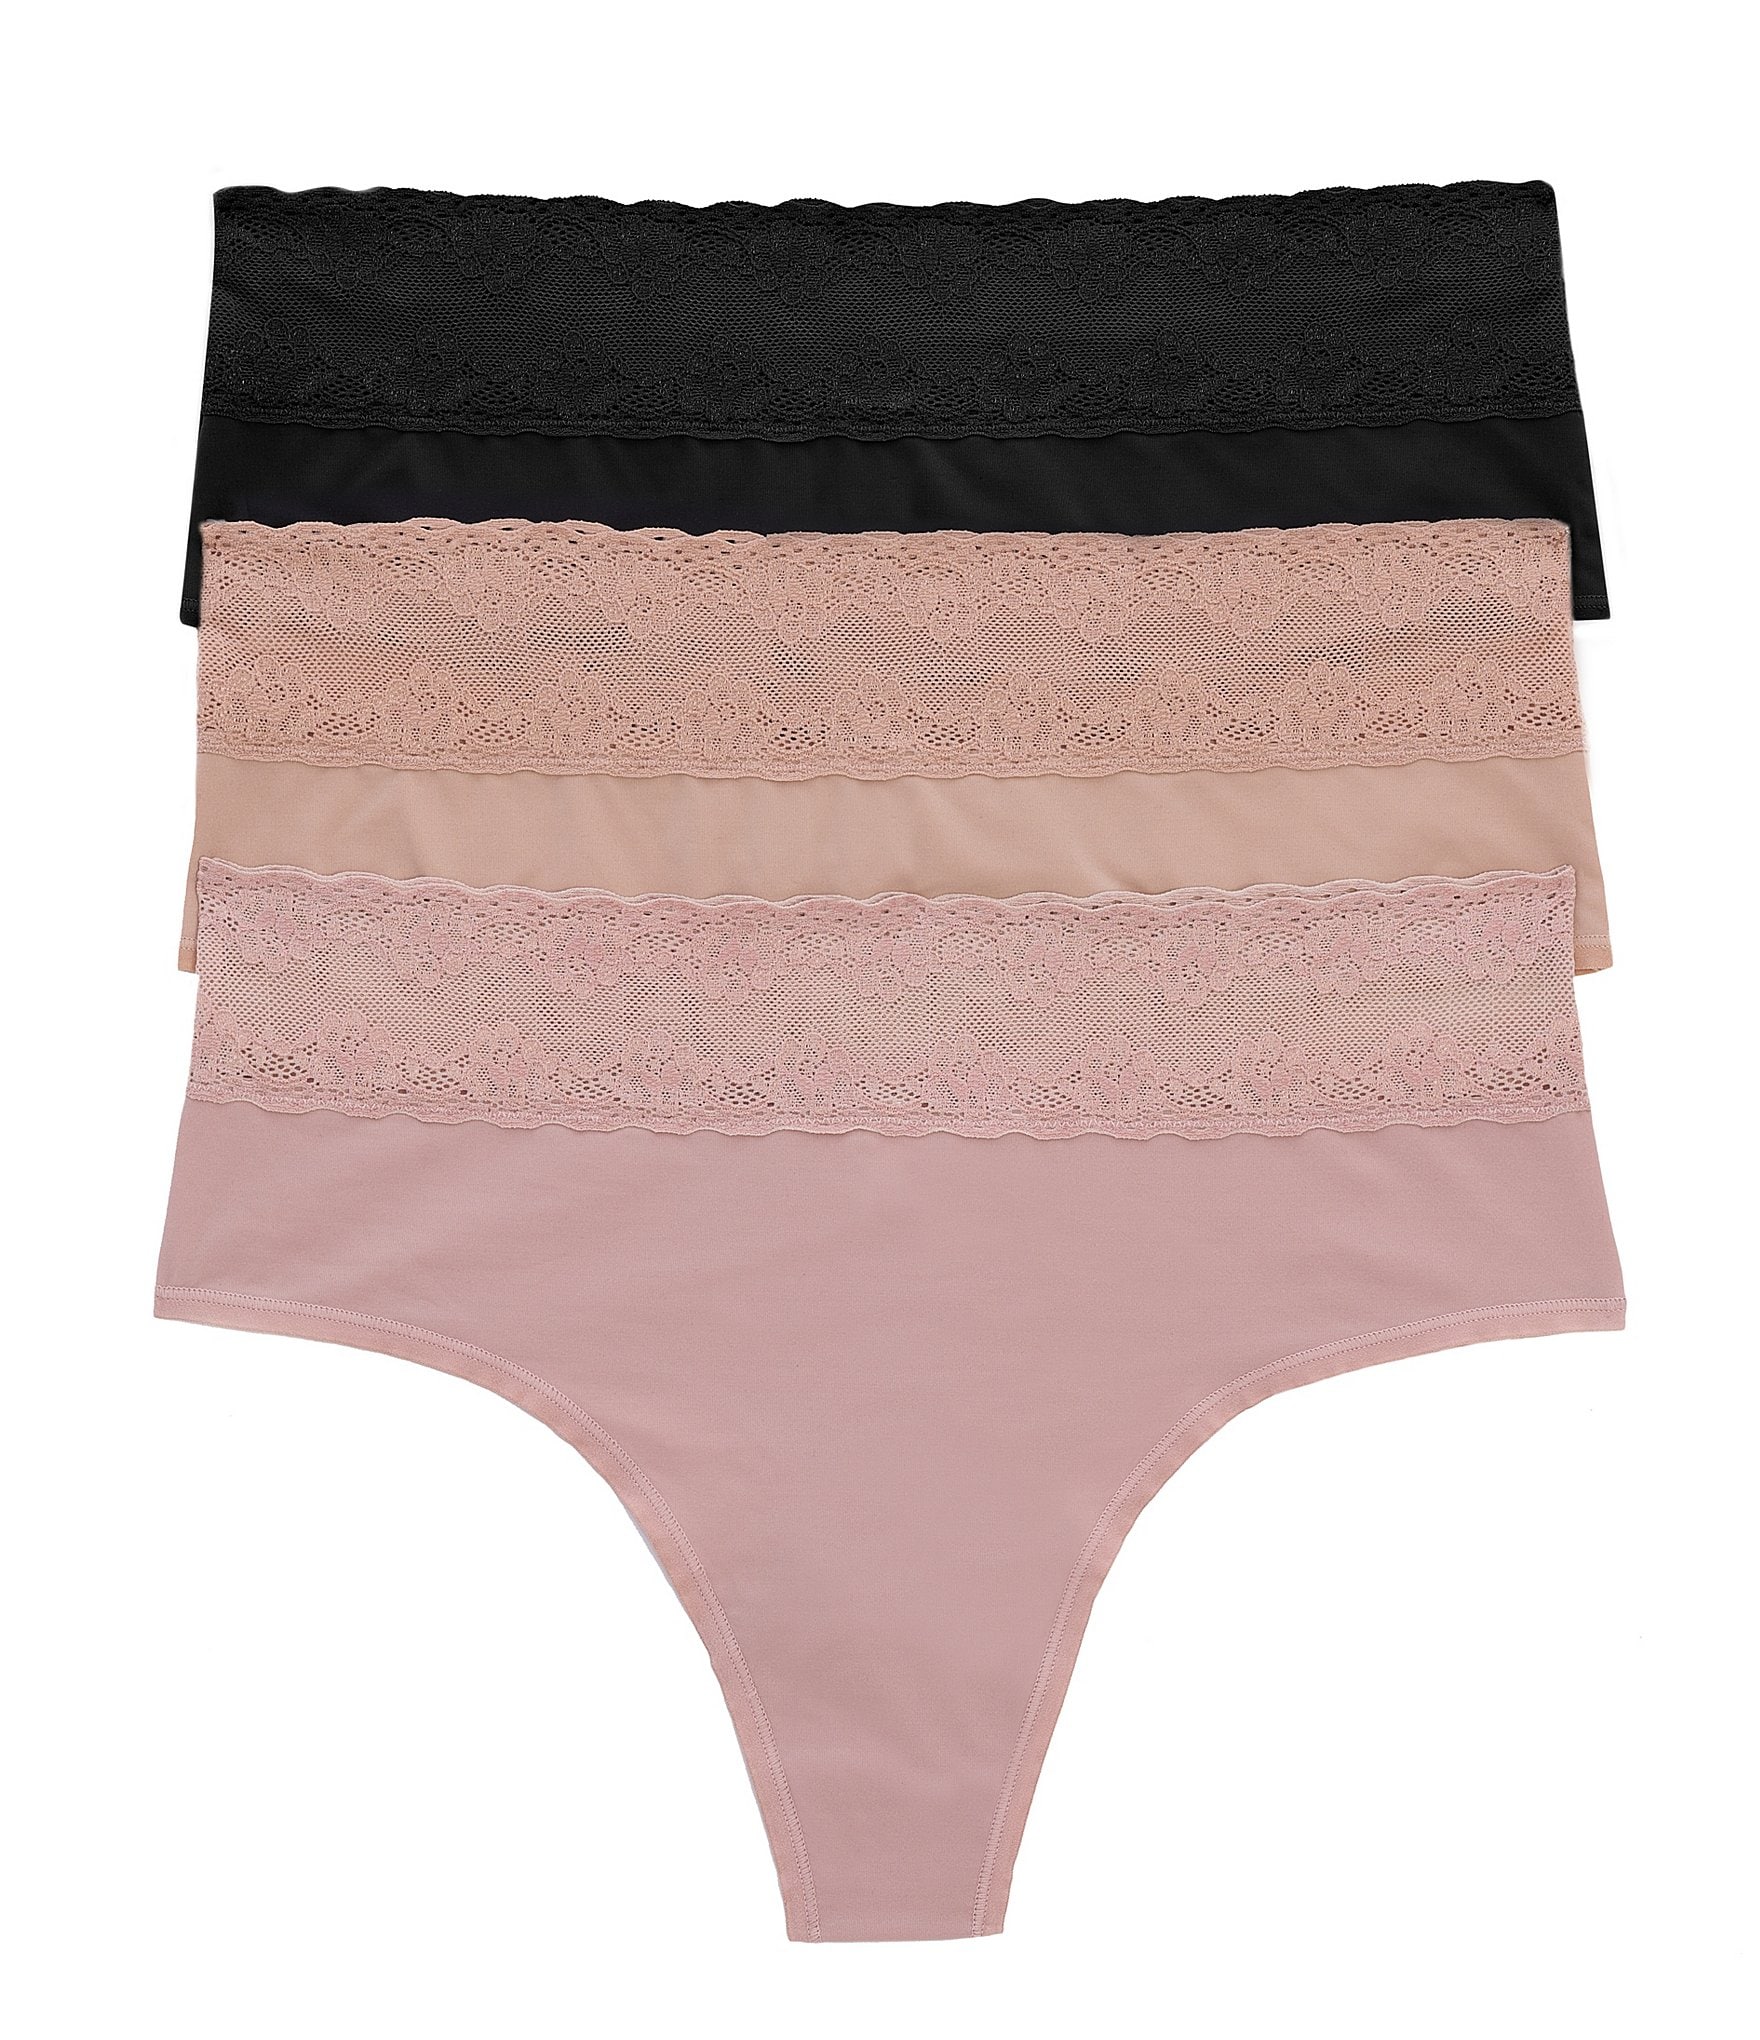 https://dimg.dillards.com/is/image/DillardsZoom/zoom/bliss-perfection-one-size-high-rise-lace-waistband-thong-3-pack-panty/00000000_zi_5ac51cb8-dd3e-402c-80f9-03ac27cad93d.jpg